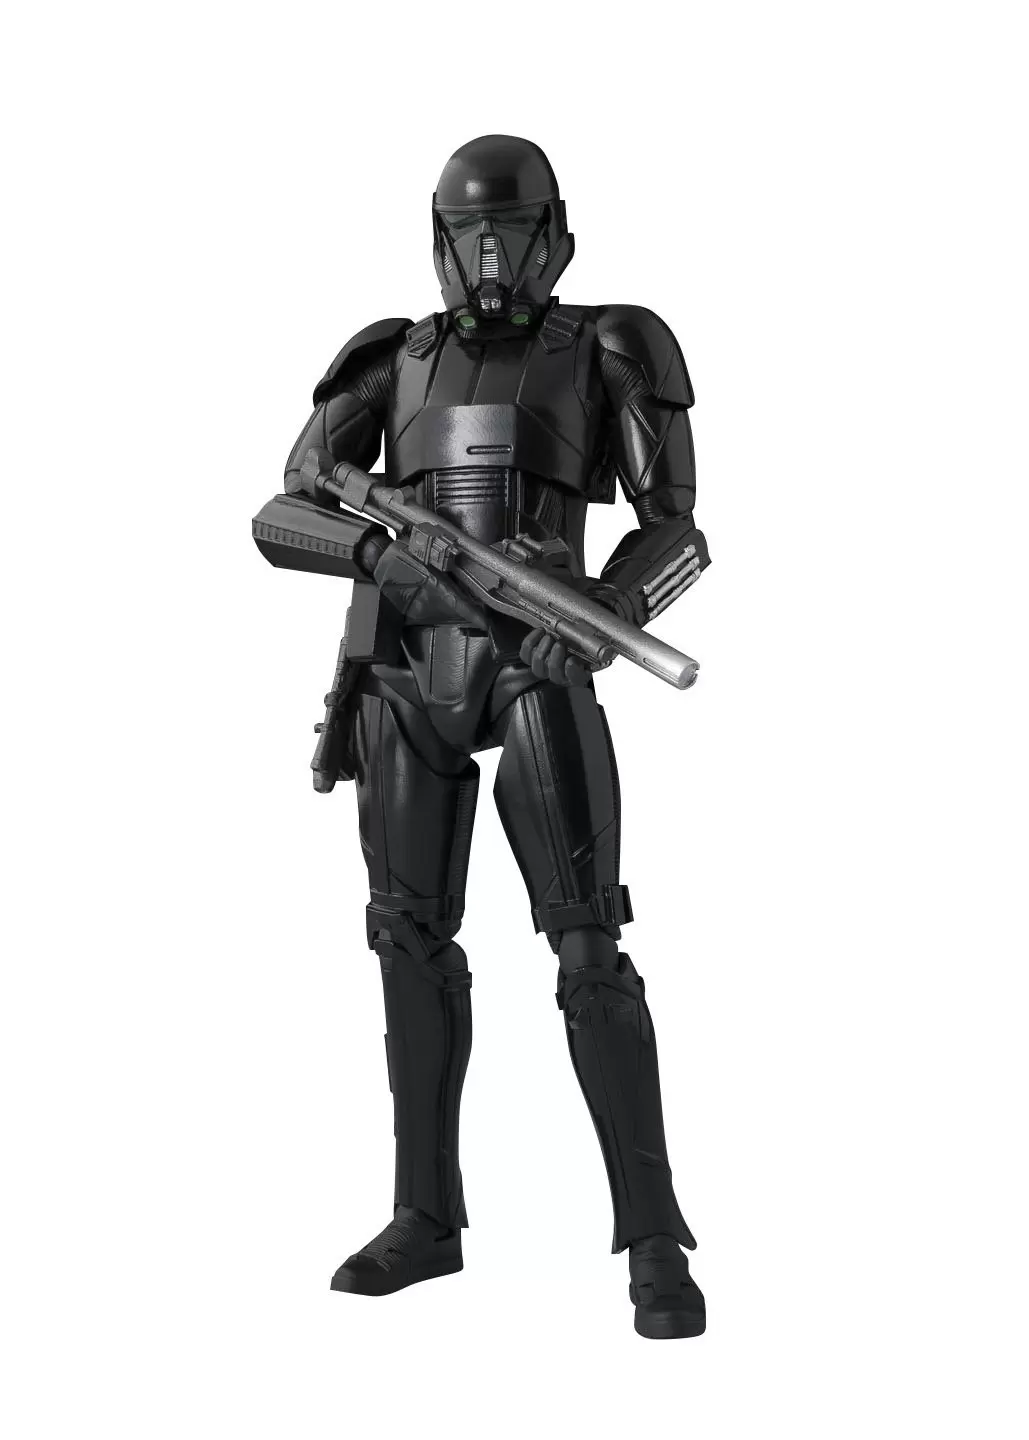 S.H. Figuarts Star Wars - Rogue One - Death Trooper